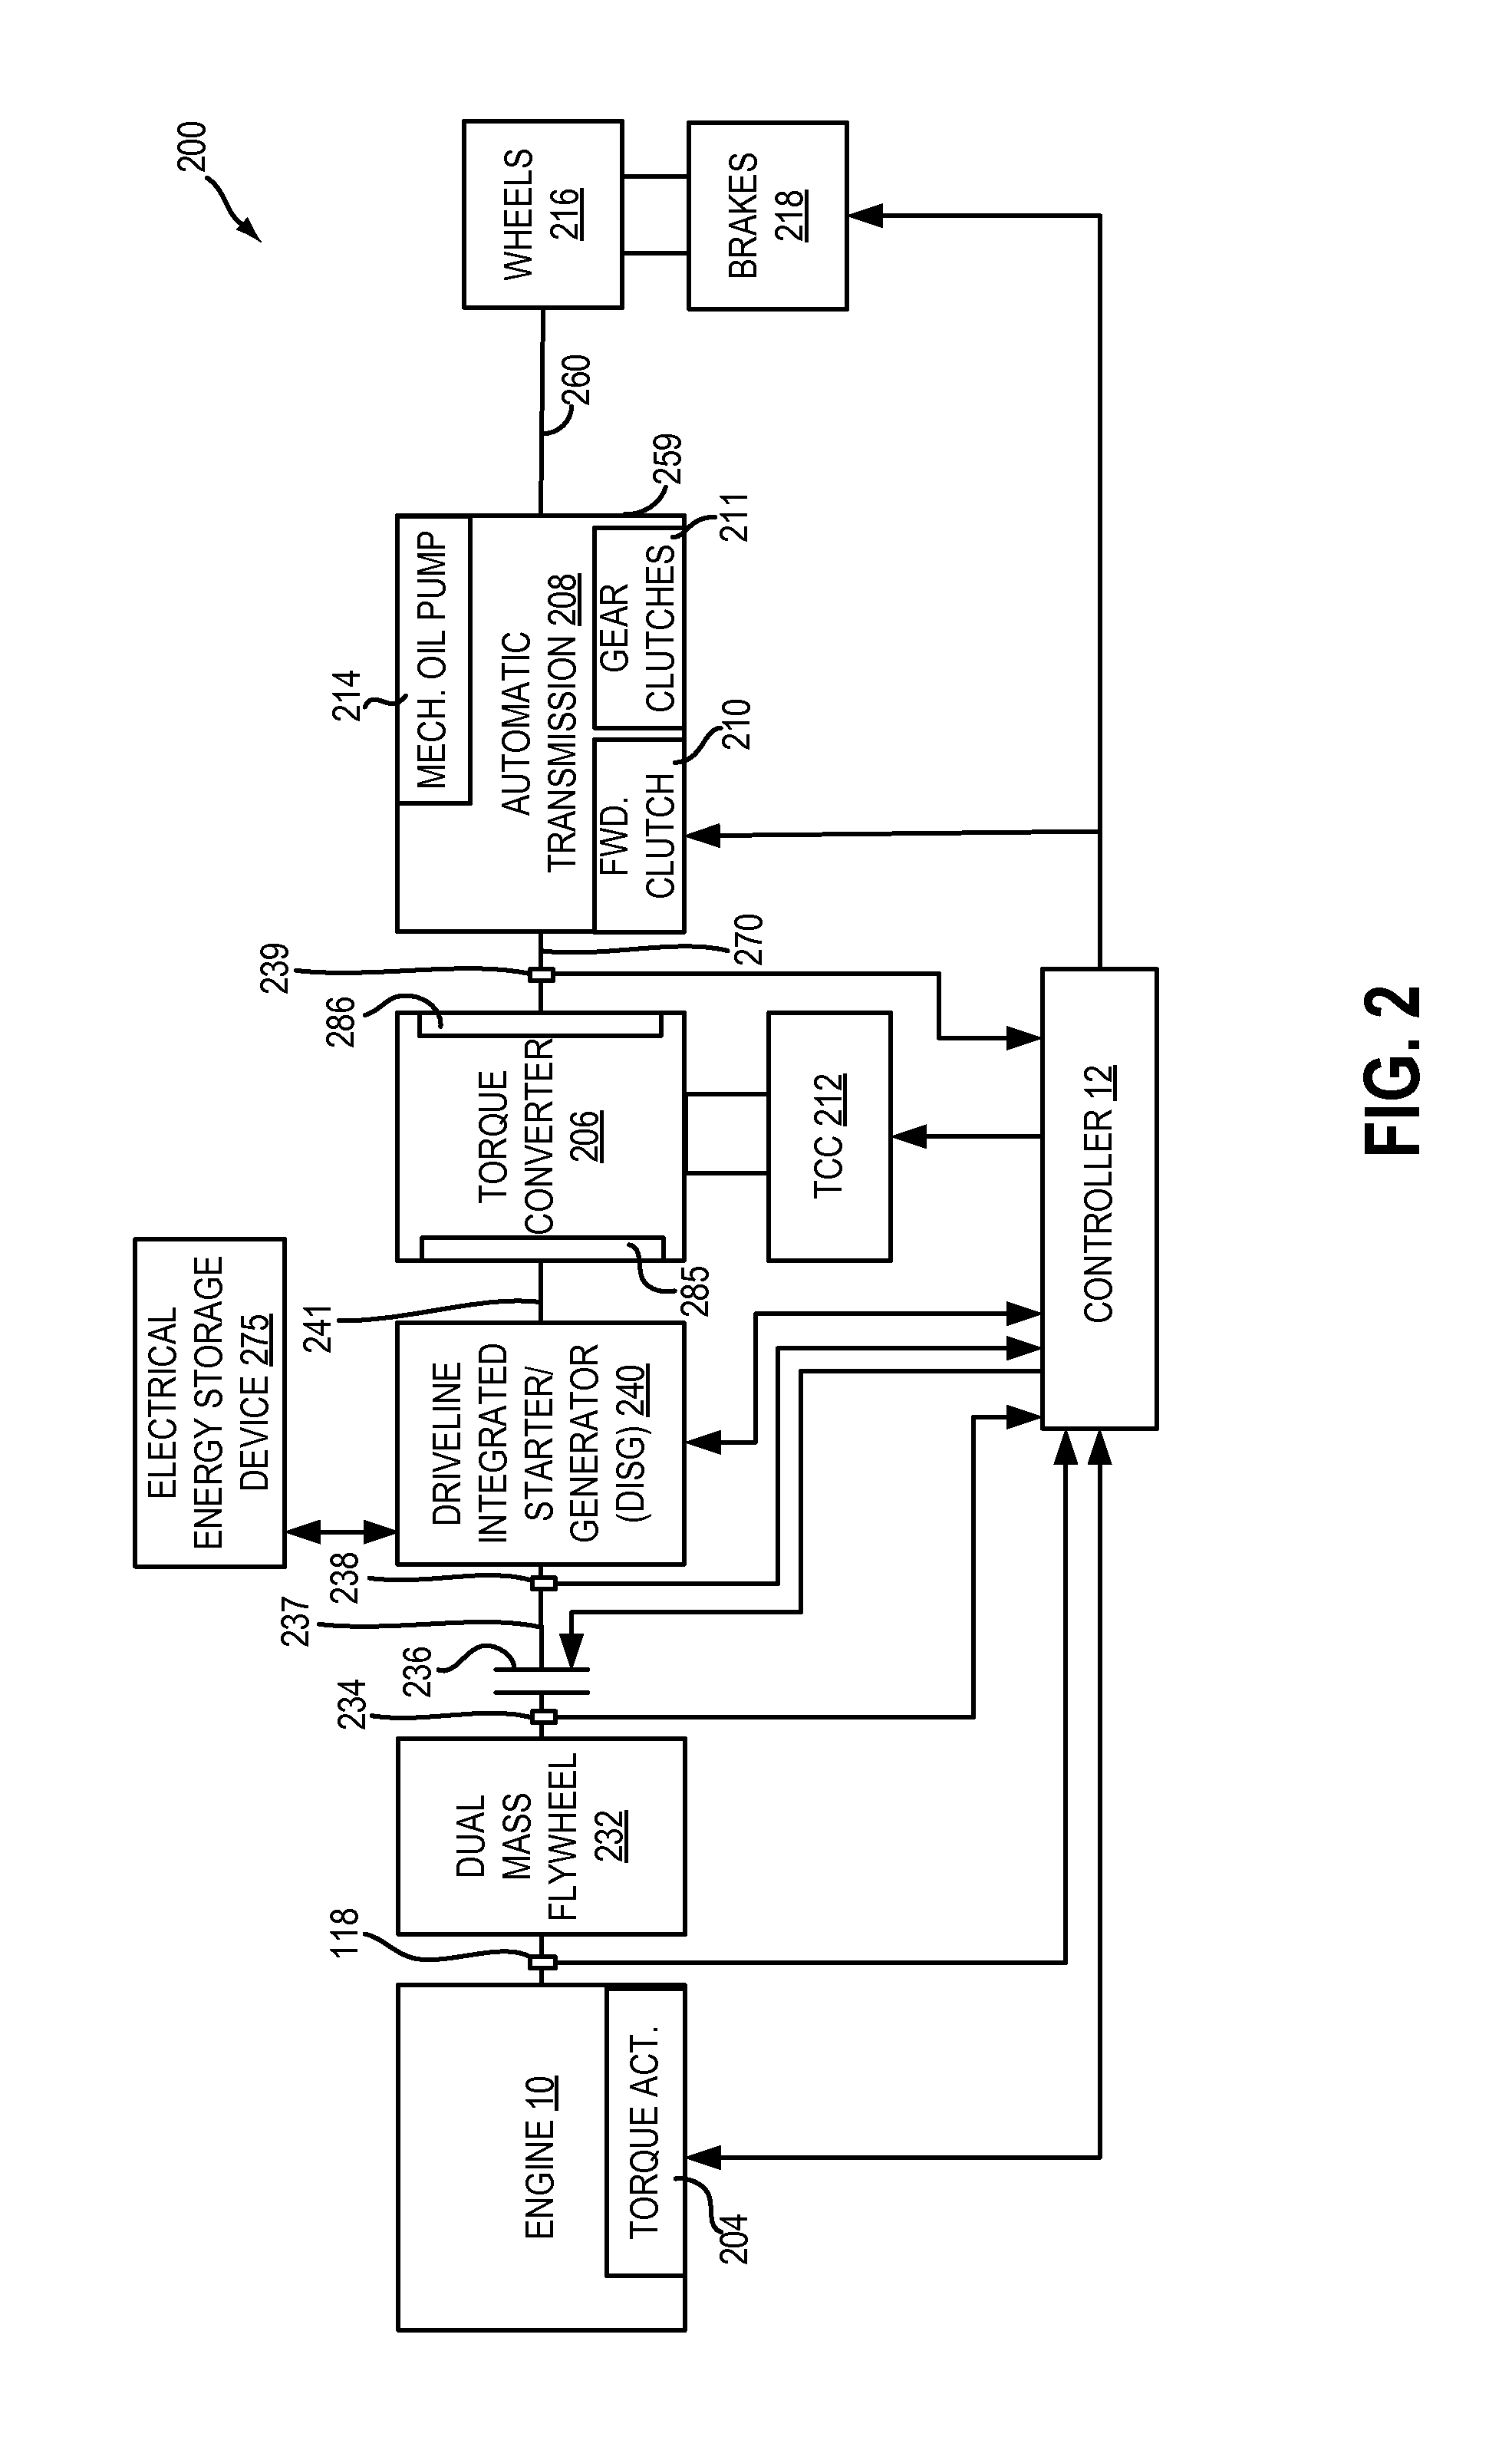 Methods for utilizing stop sign and traffic light detections to enhance fuel economy and safety